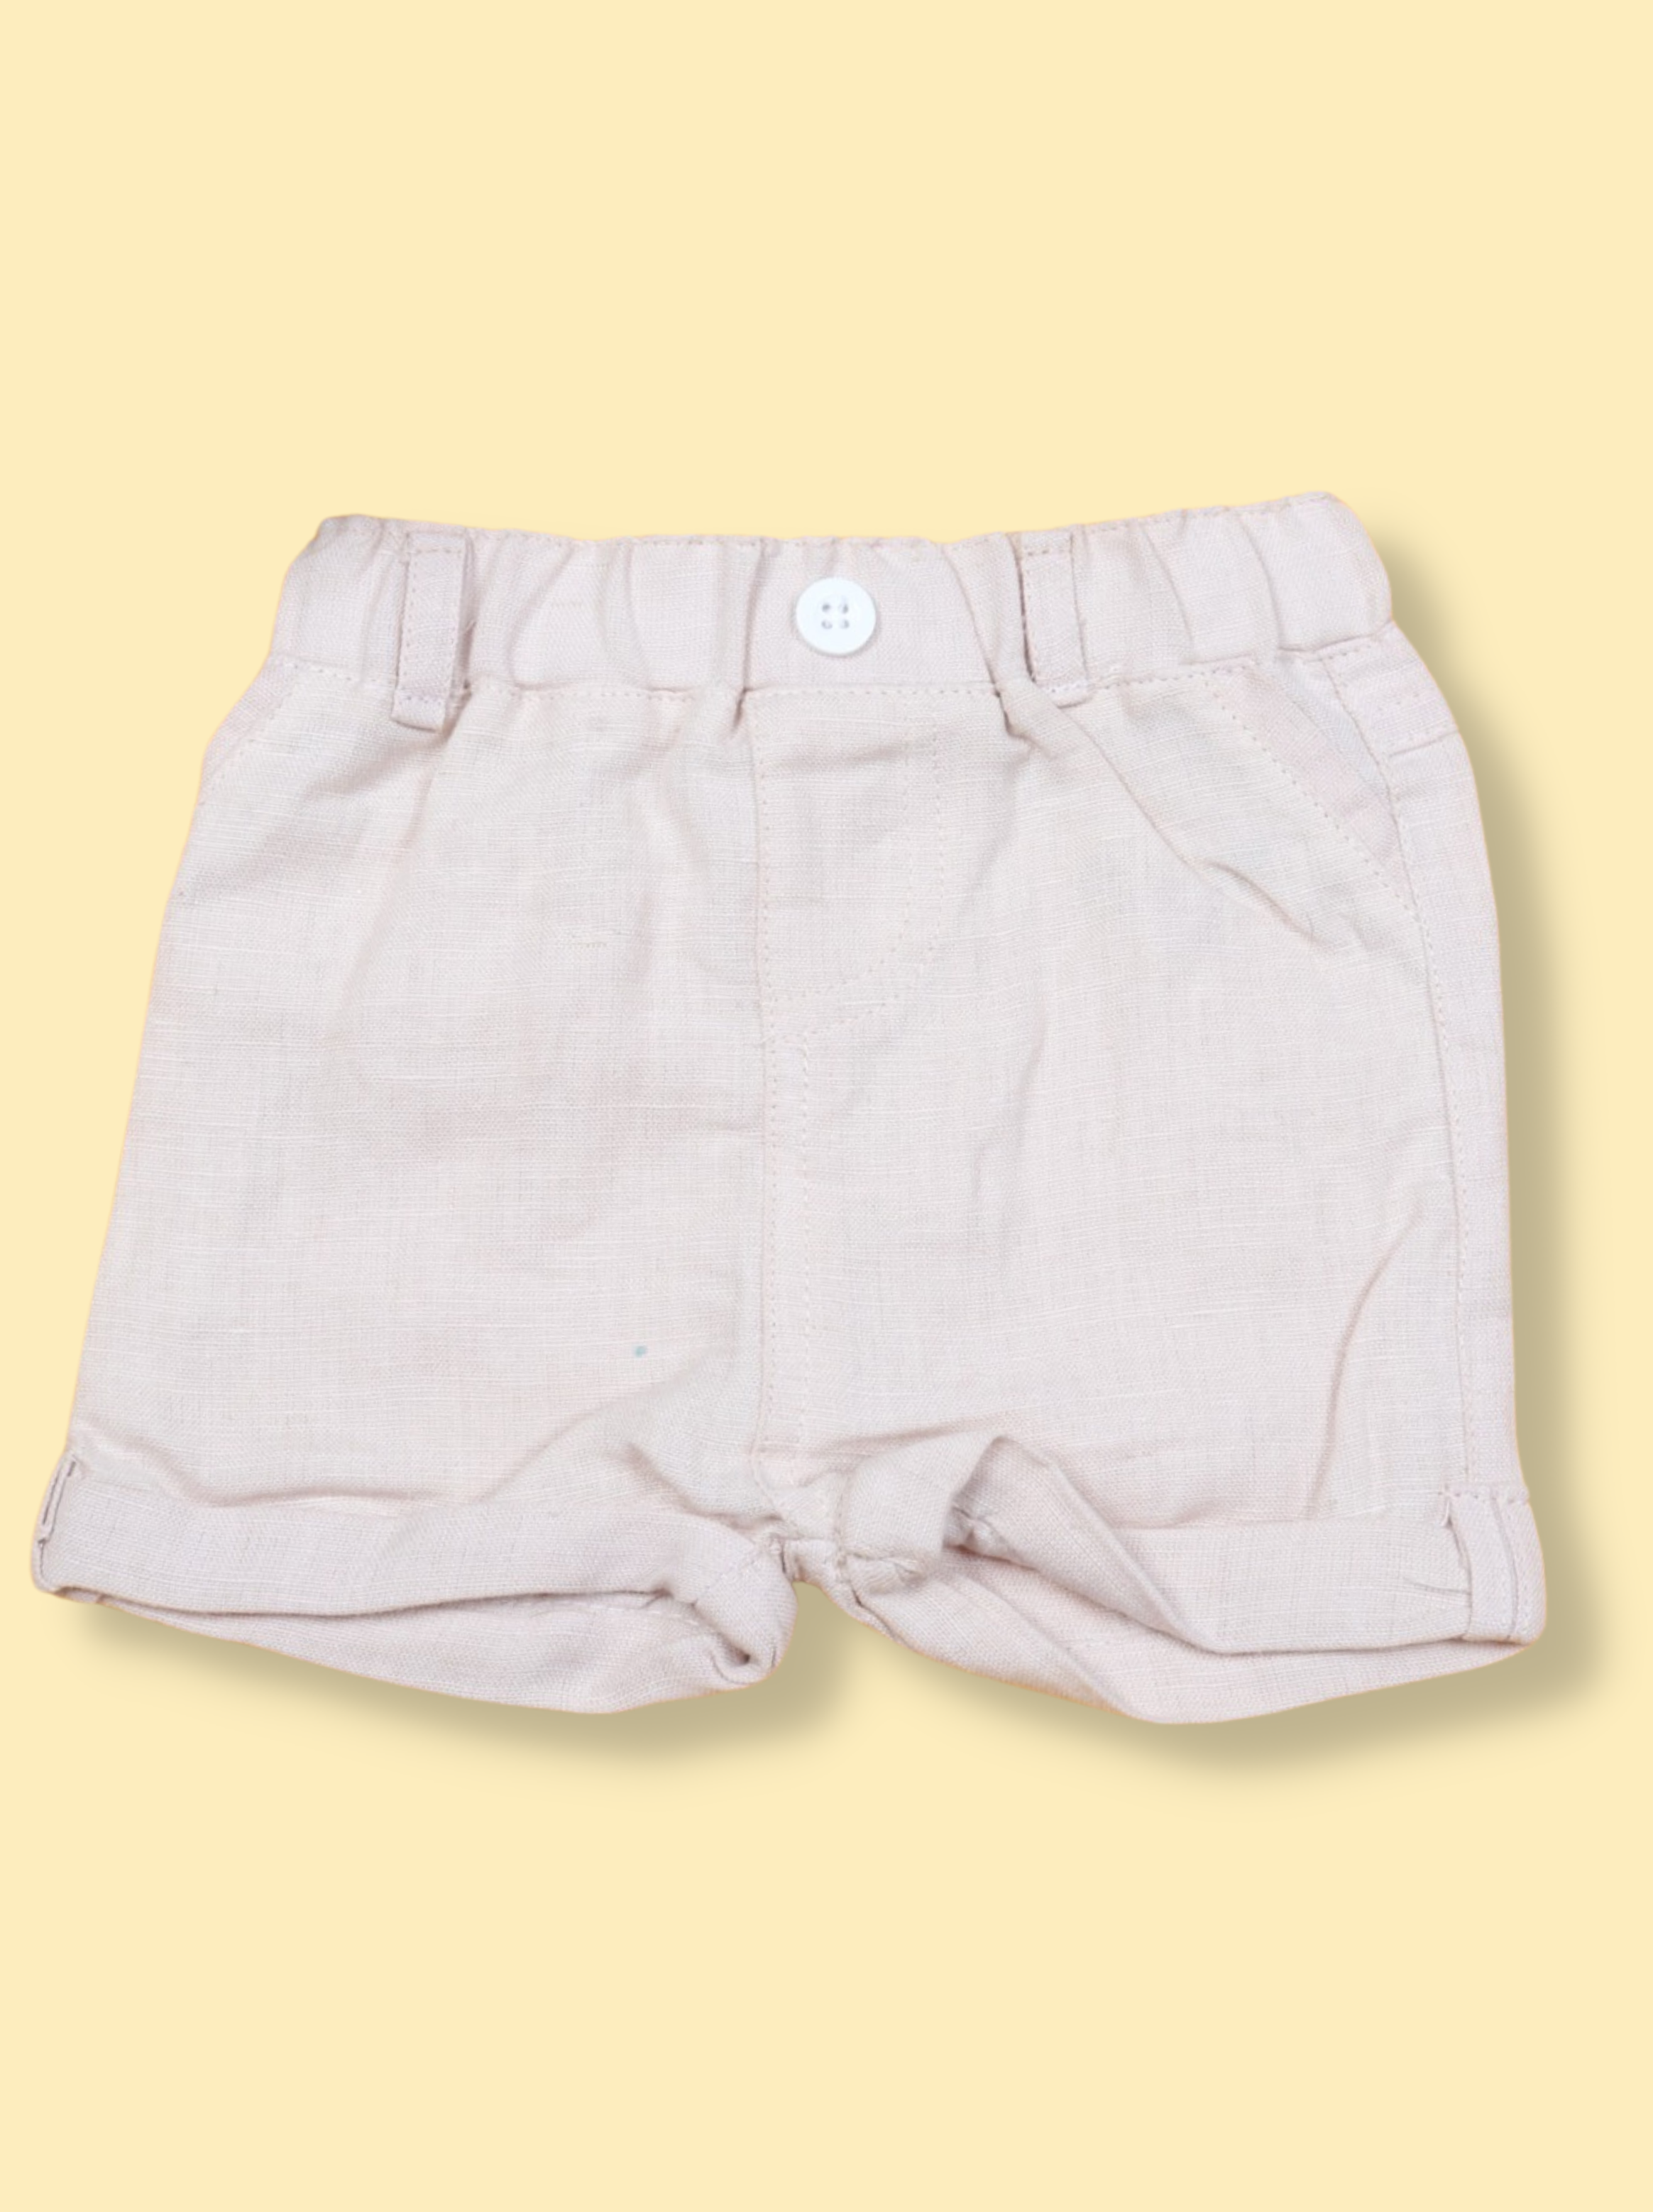 Babies Cream Solid Woven Cotton Pant